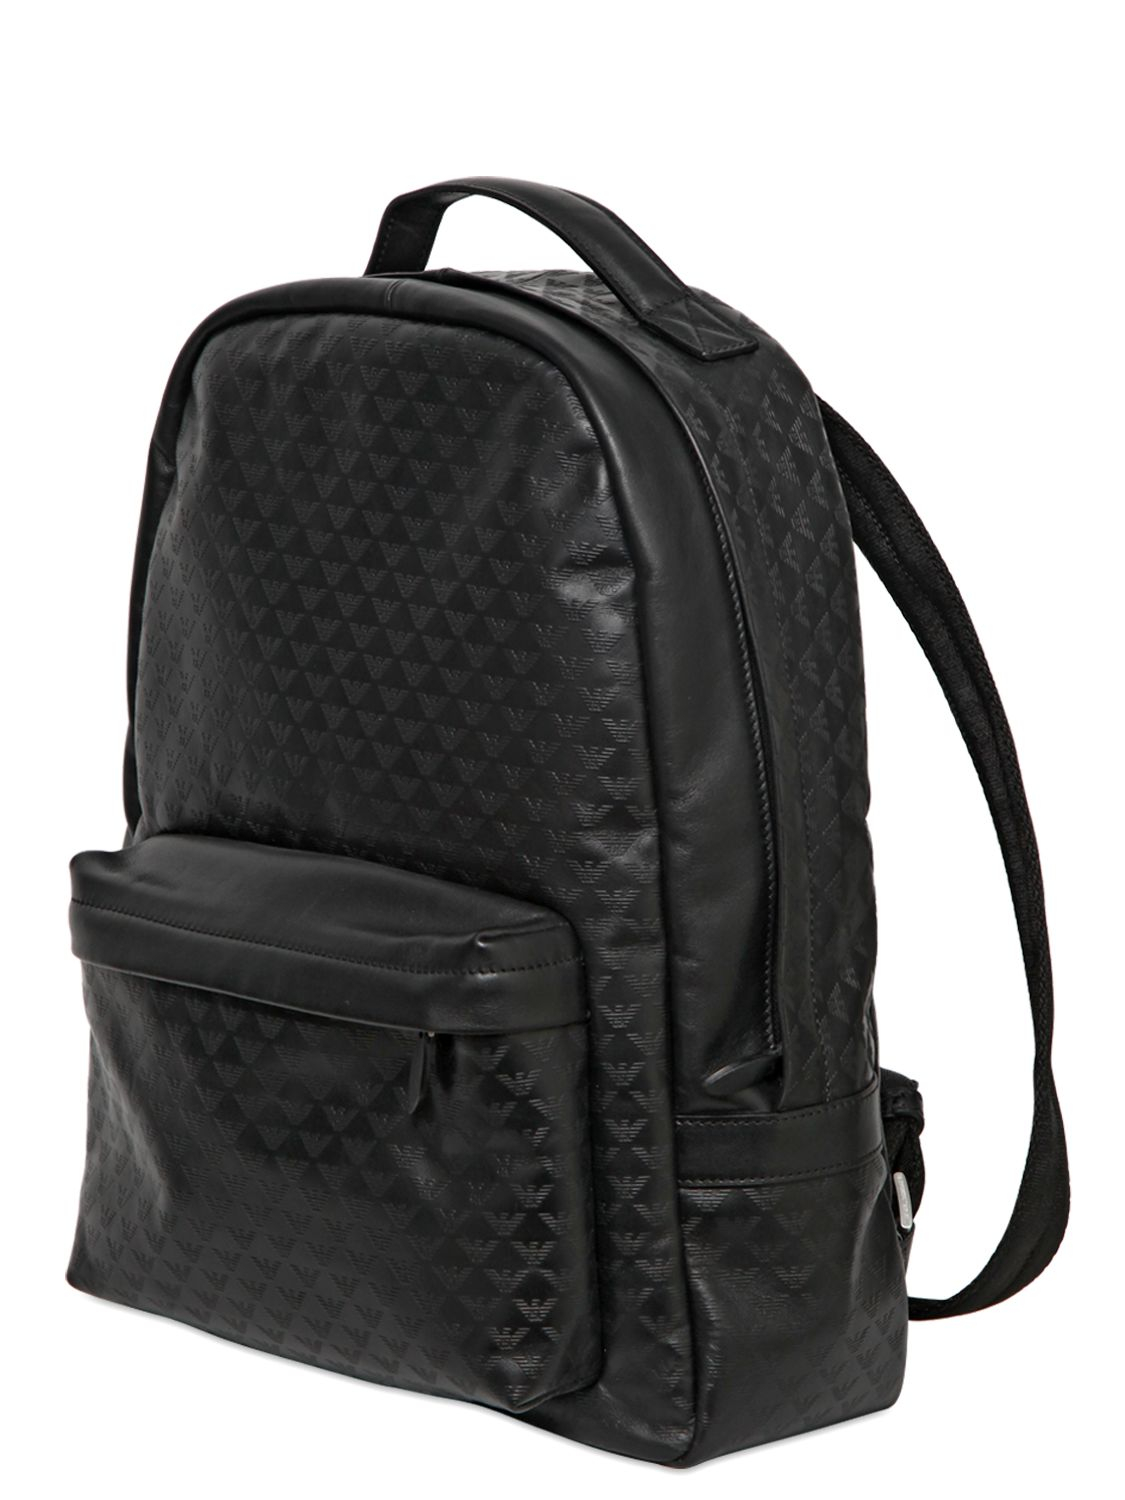 Lyst - Emporio Armani Printed Logo Leather Backpack in Black for Men